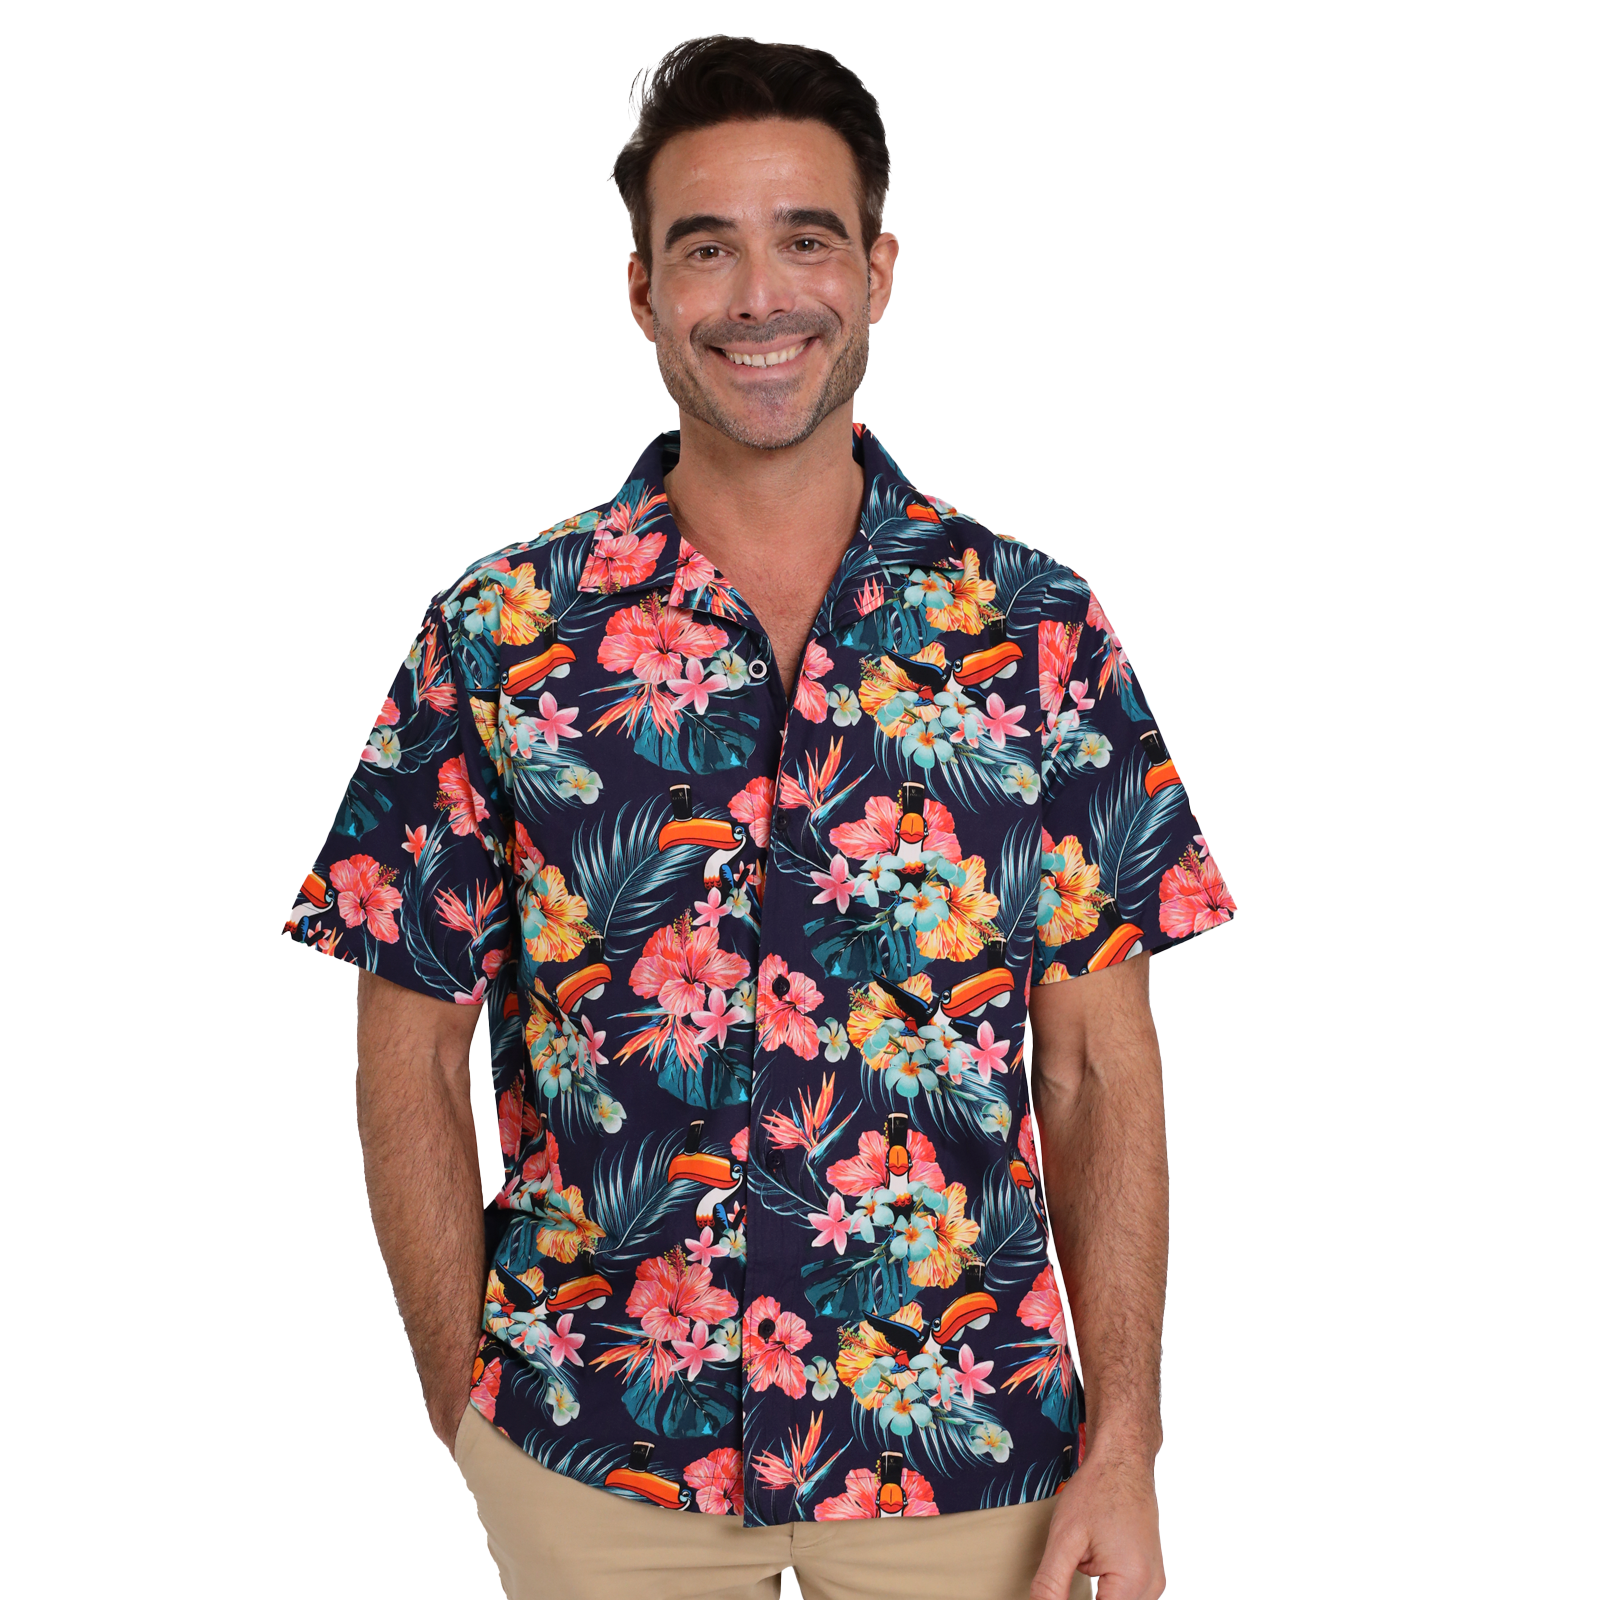 A smiling person wears a 100% cotton Guinness Toucan Hawaiian Shirt by Guinness and beige pants, standing against a white background.